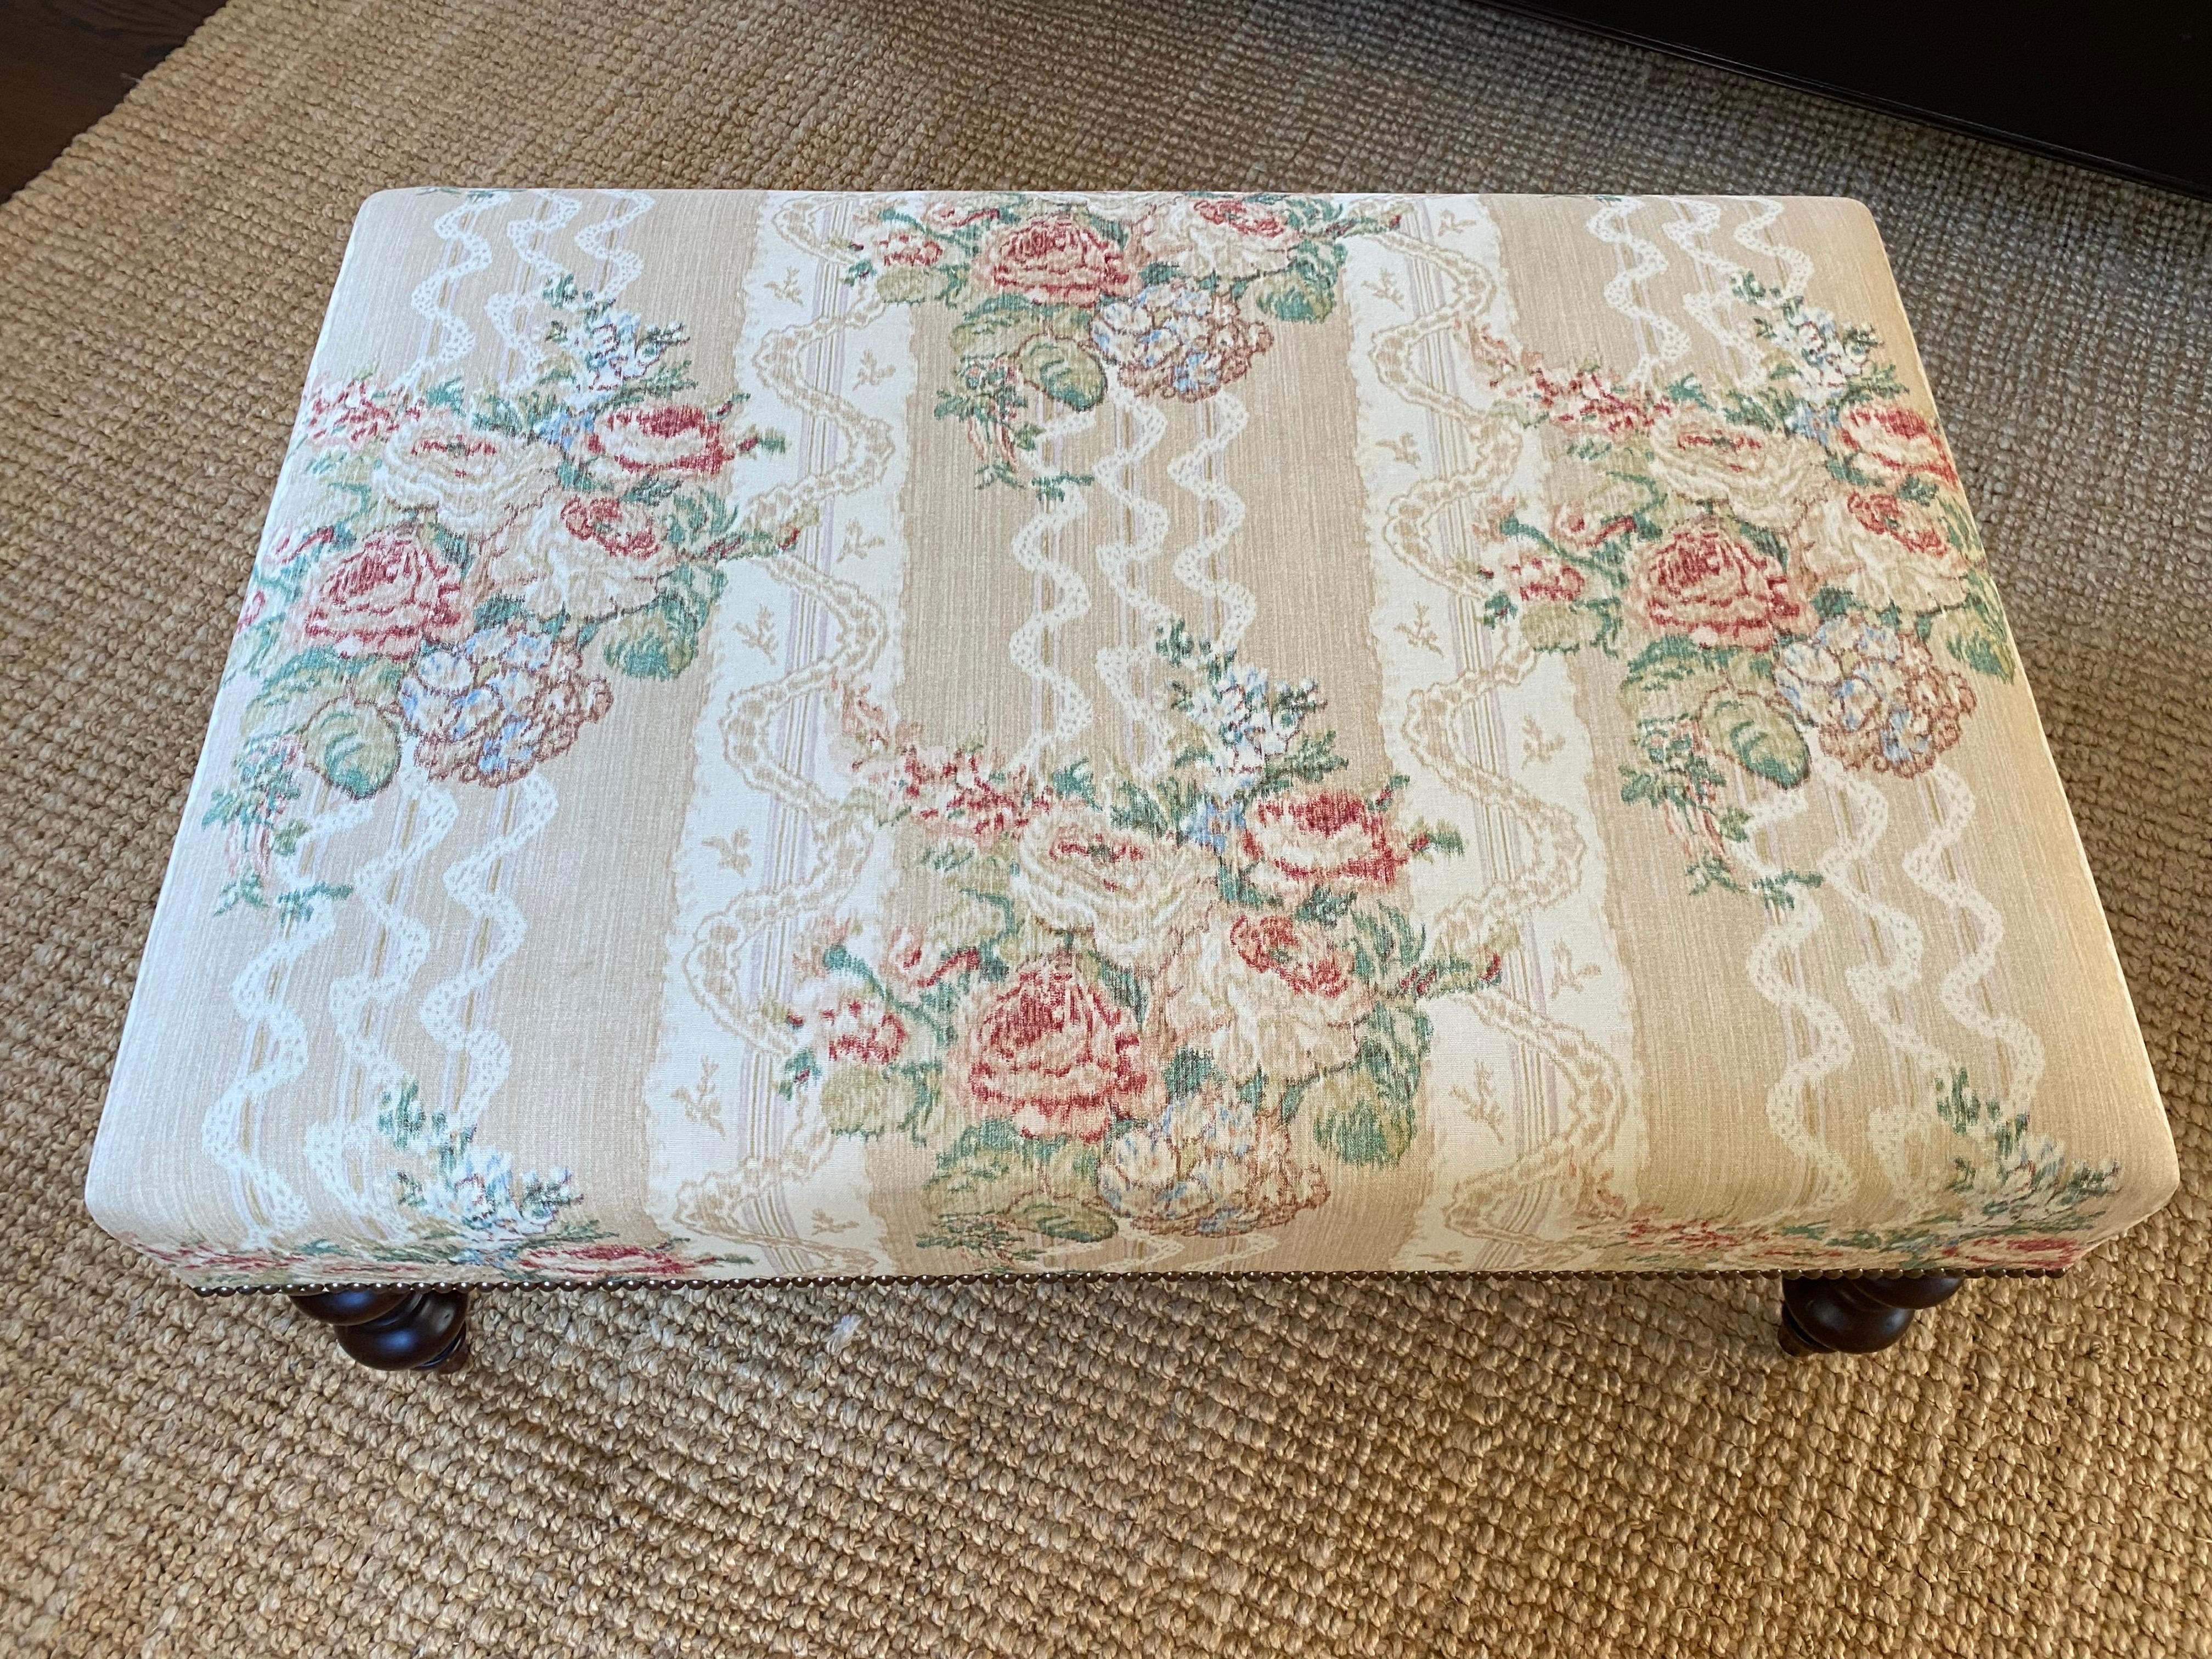 American Vintage Upholstered Ottoman in Floral Chintz Stripe with Slipcover For Sale